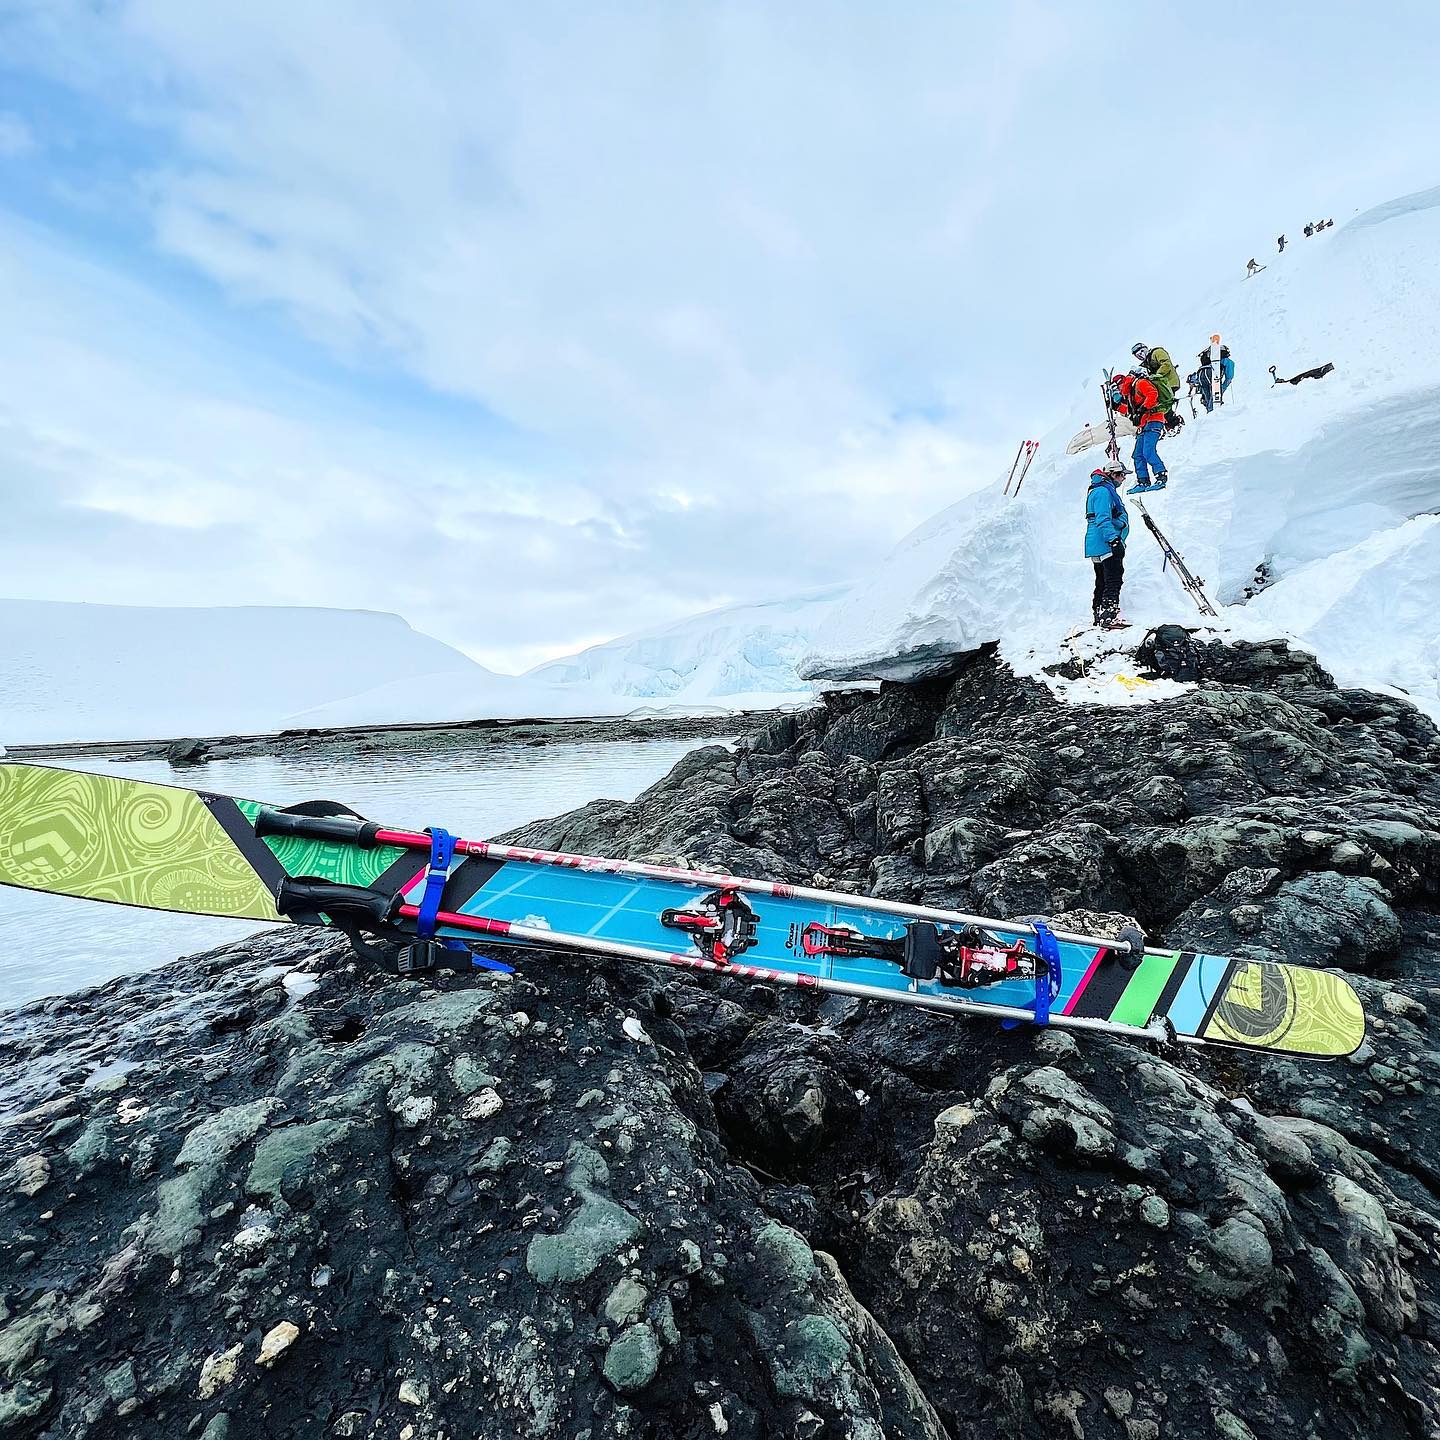 Colorful Folsom ski sitting on a rock in front of climbers in Antarctica.